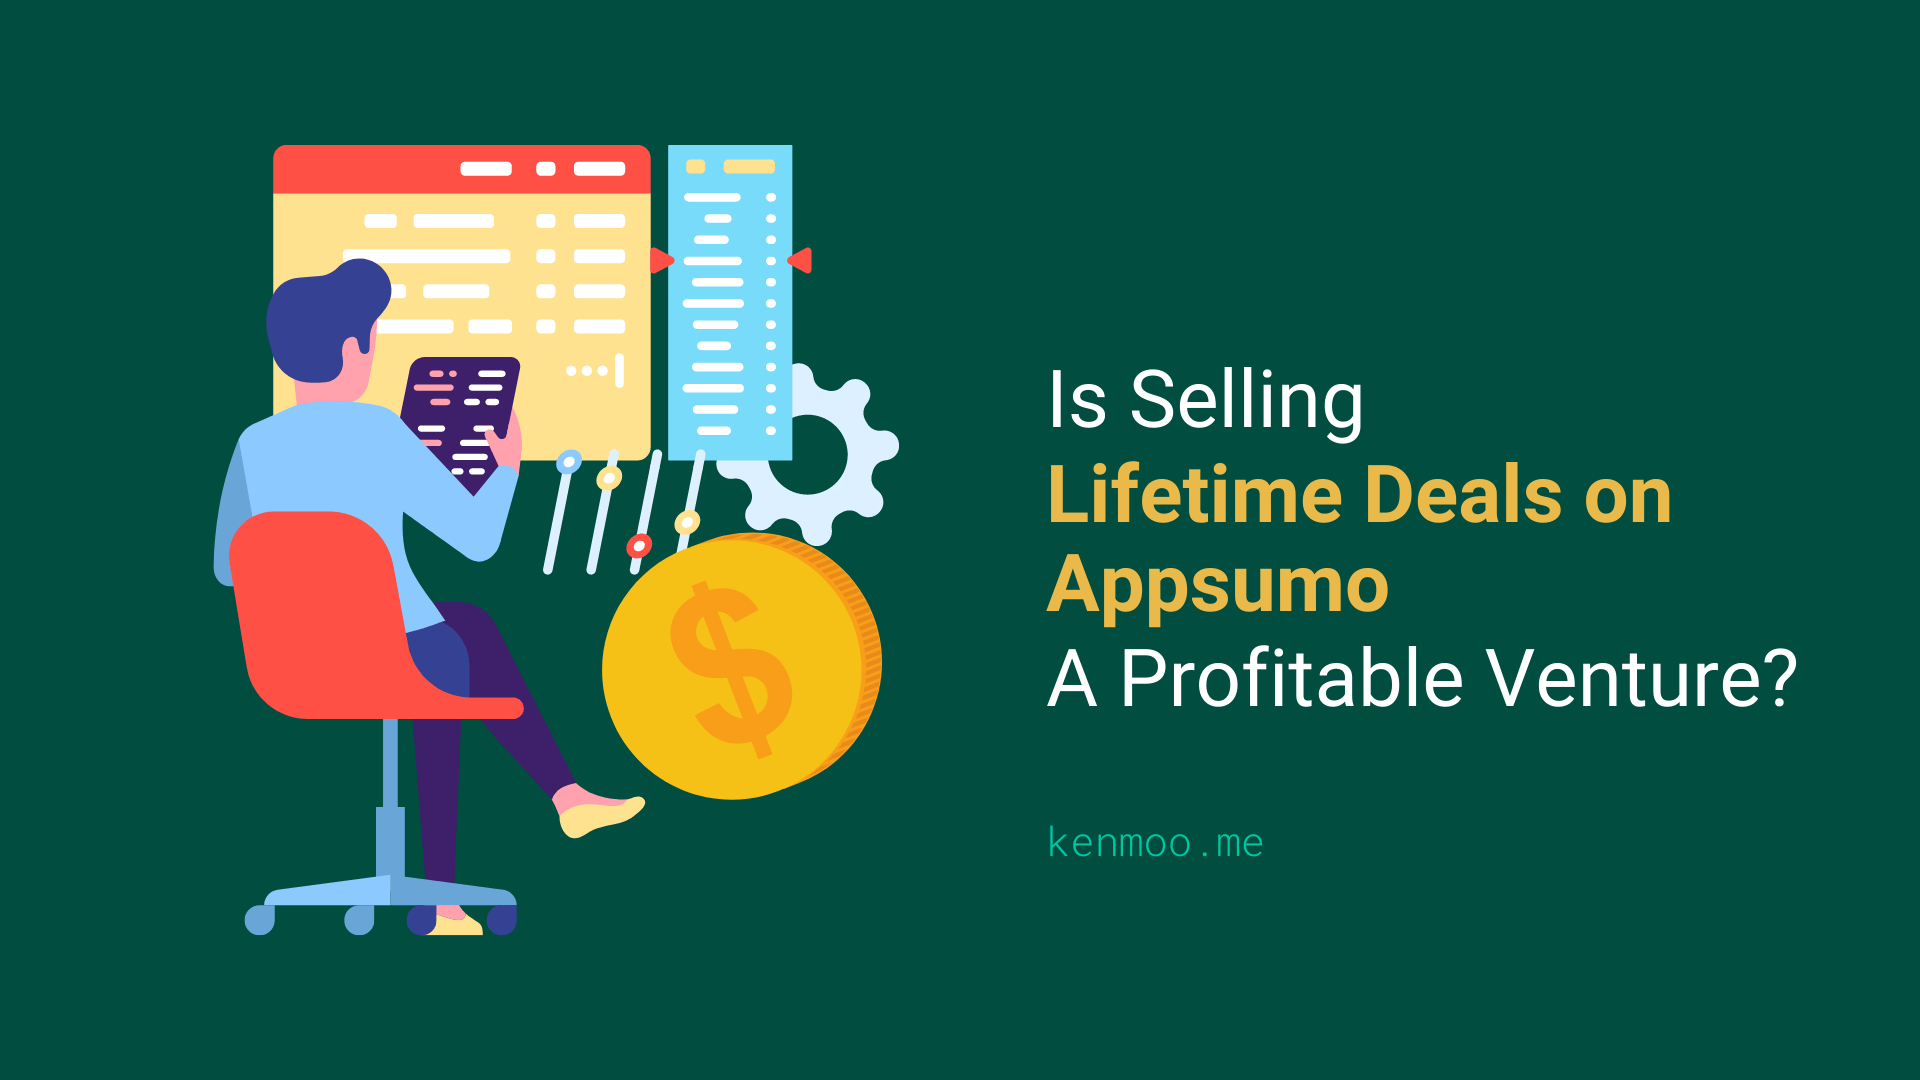 Is Selling an AppSumo Lifetime Deal a Profitable Venture for a SaaS Business?